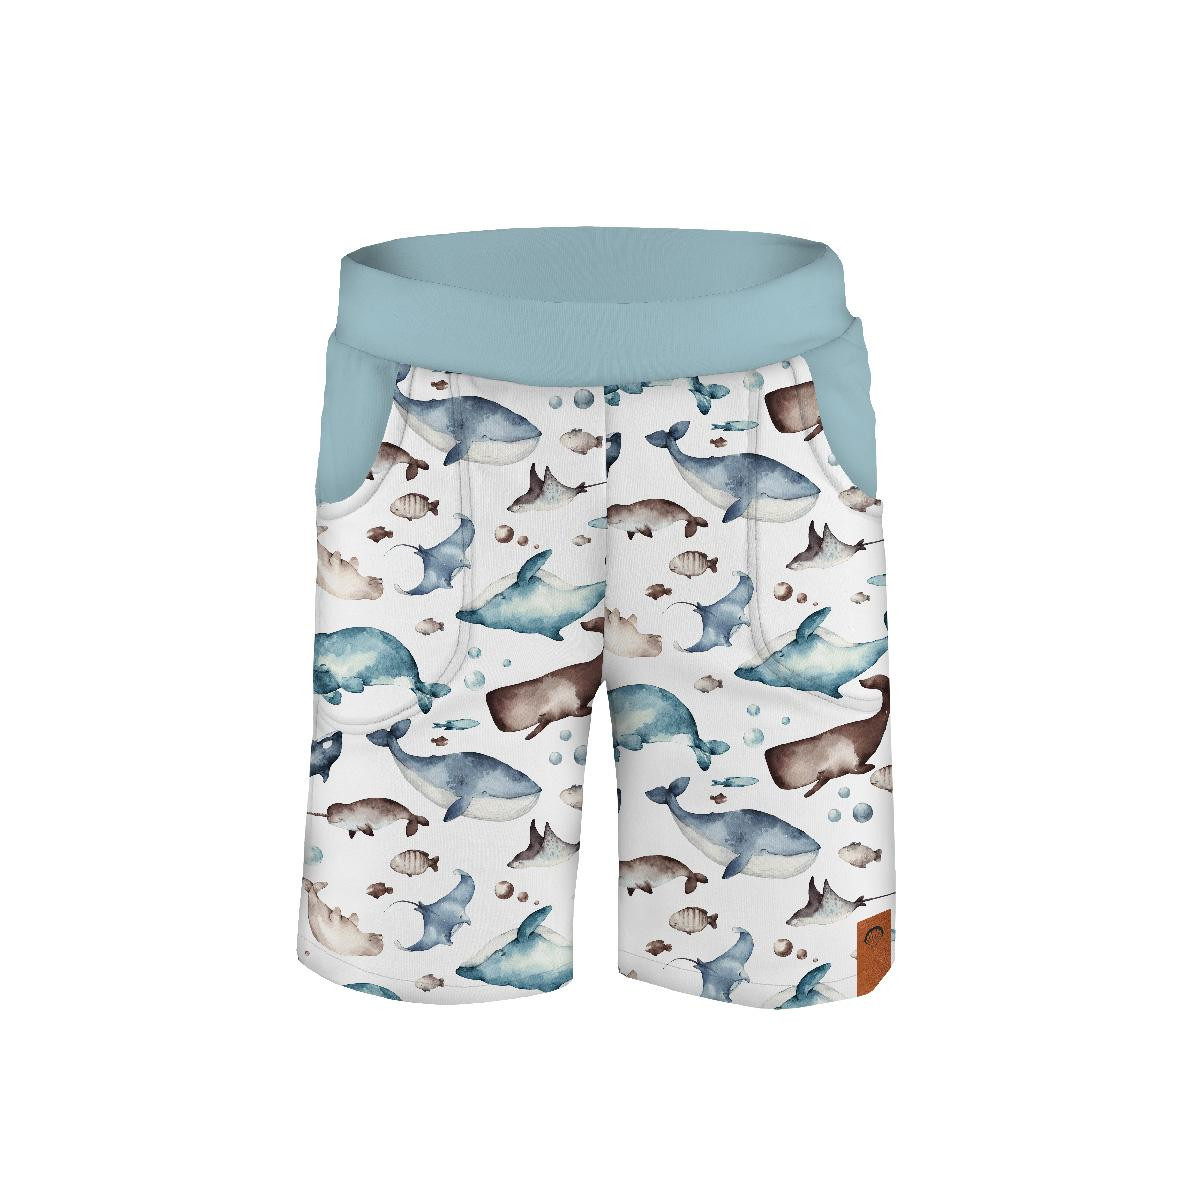 KID`S SHORTS (RIO) - OCEAN MIX (THE WORLD OF THE OCEAN) - looped knit fabric 